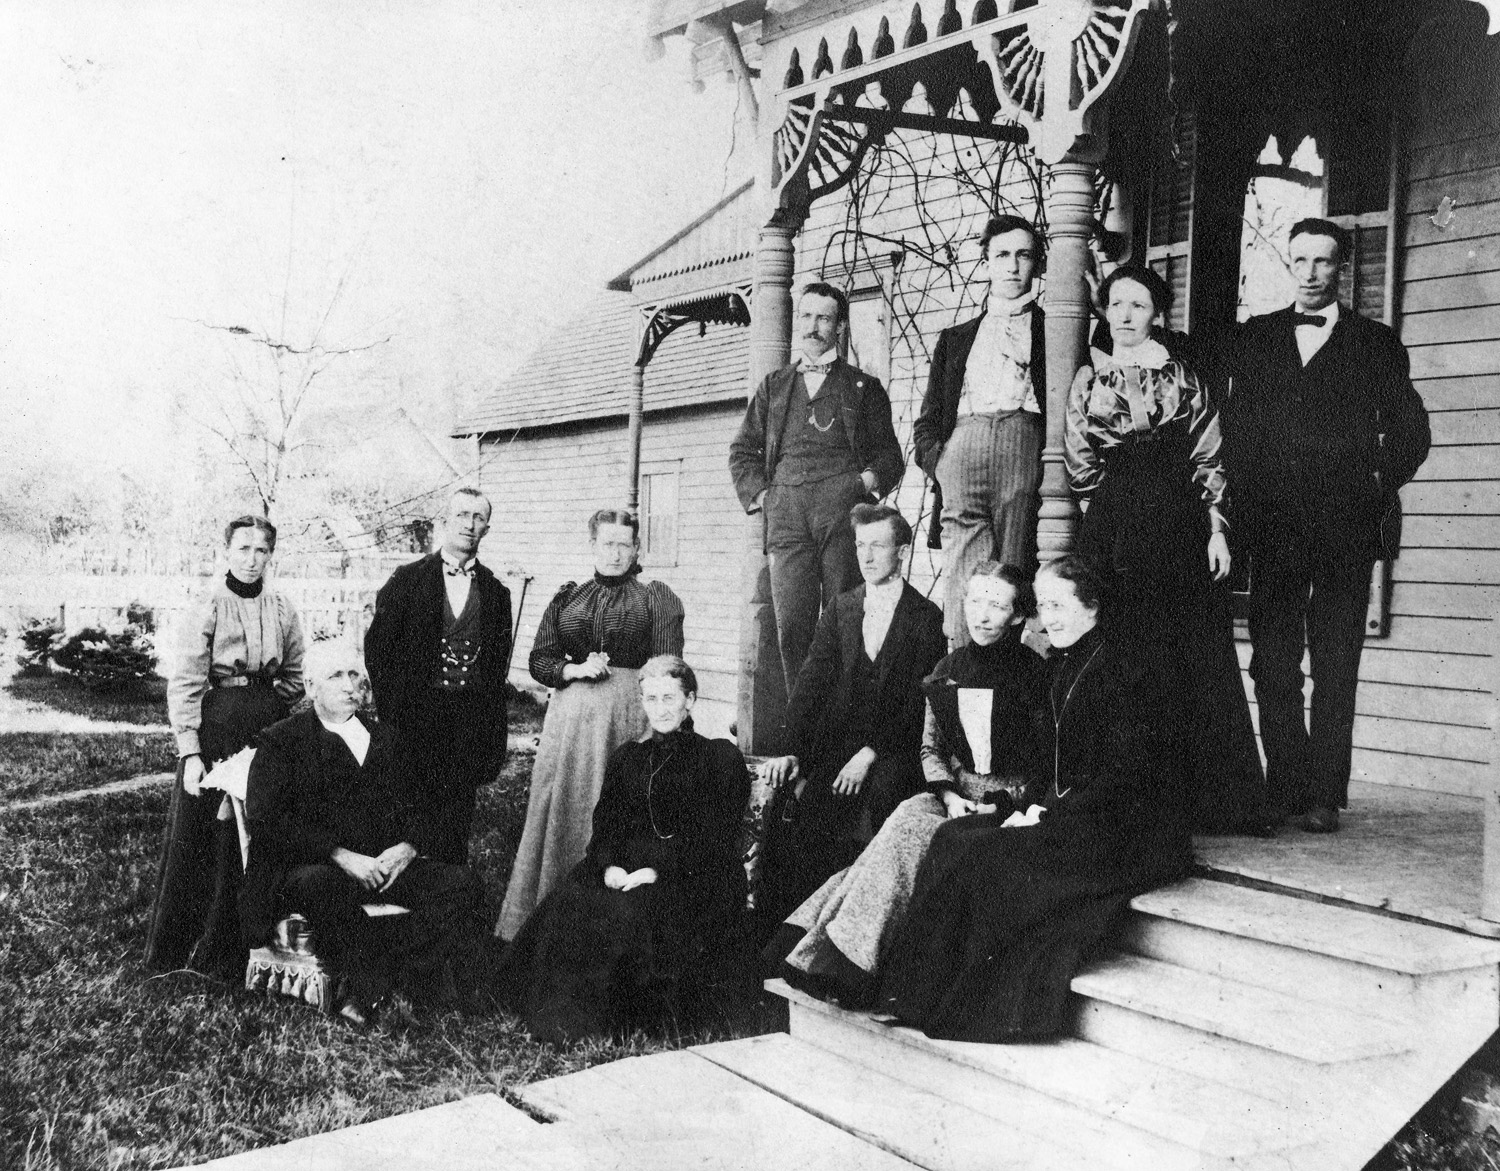 This was taken on the family farm near Sidel, Illinois in 1899. The photographer, Luther Manning, is in the center, hands in his pocket, looking directly at the camera. He was a professional photographer, working out of Danville, IL at times, and took other pictures of my ancestors. The oldest couple seated are my GG-grandparents. I have a list of who is who in the picture but won't list all the names here. Soon most of these people left east central Illinois for Iowa and norther Indiana to join other farming parts of the family. View full size.